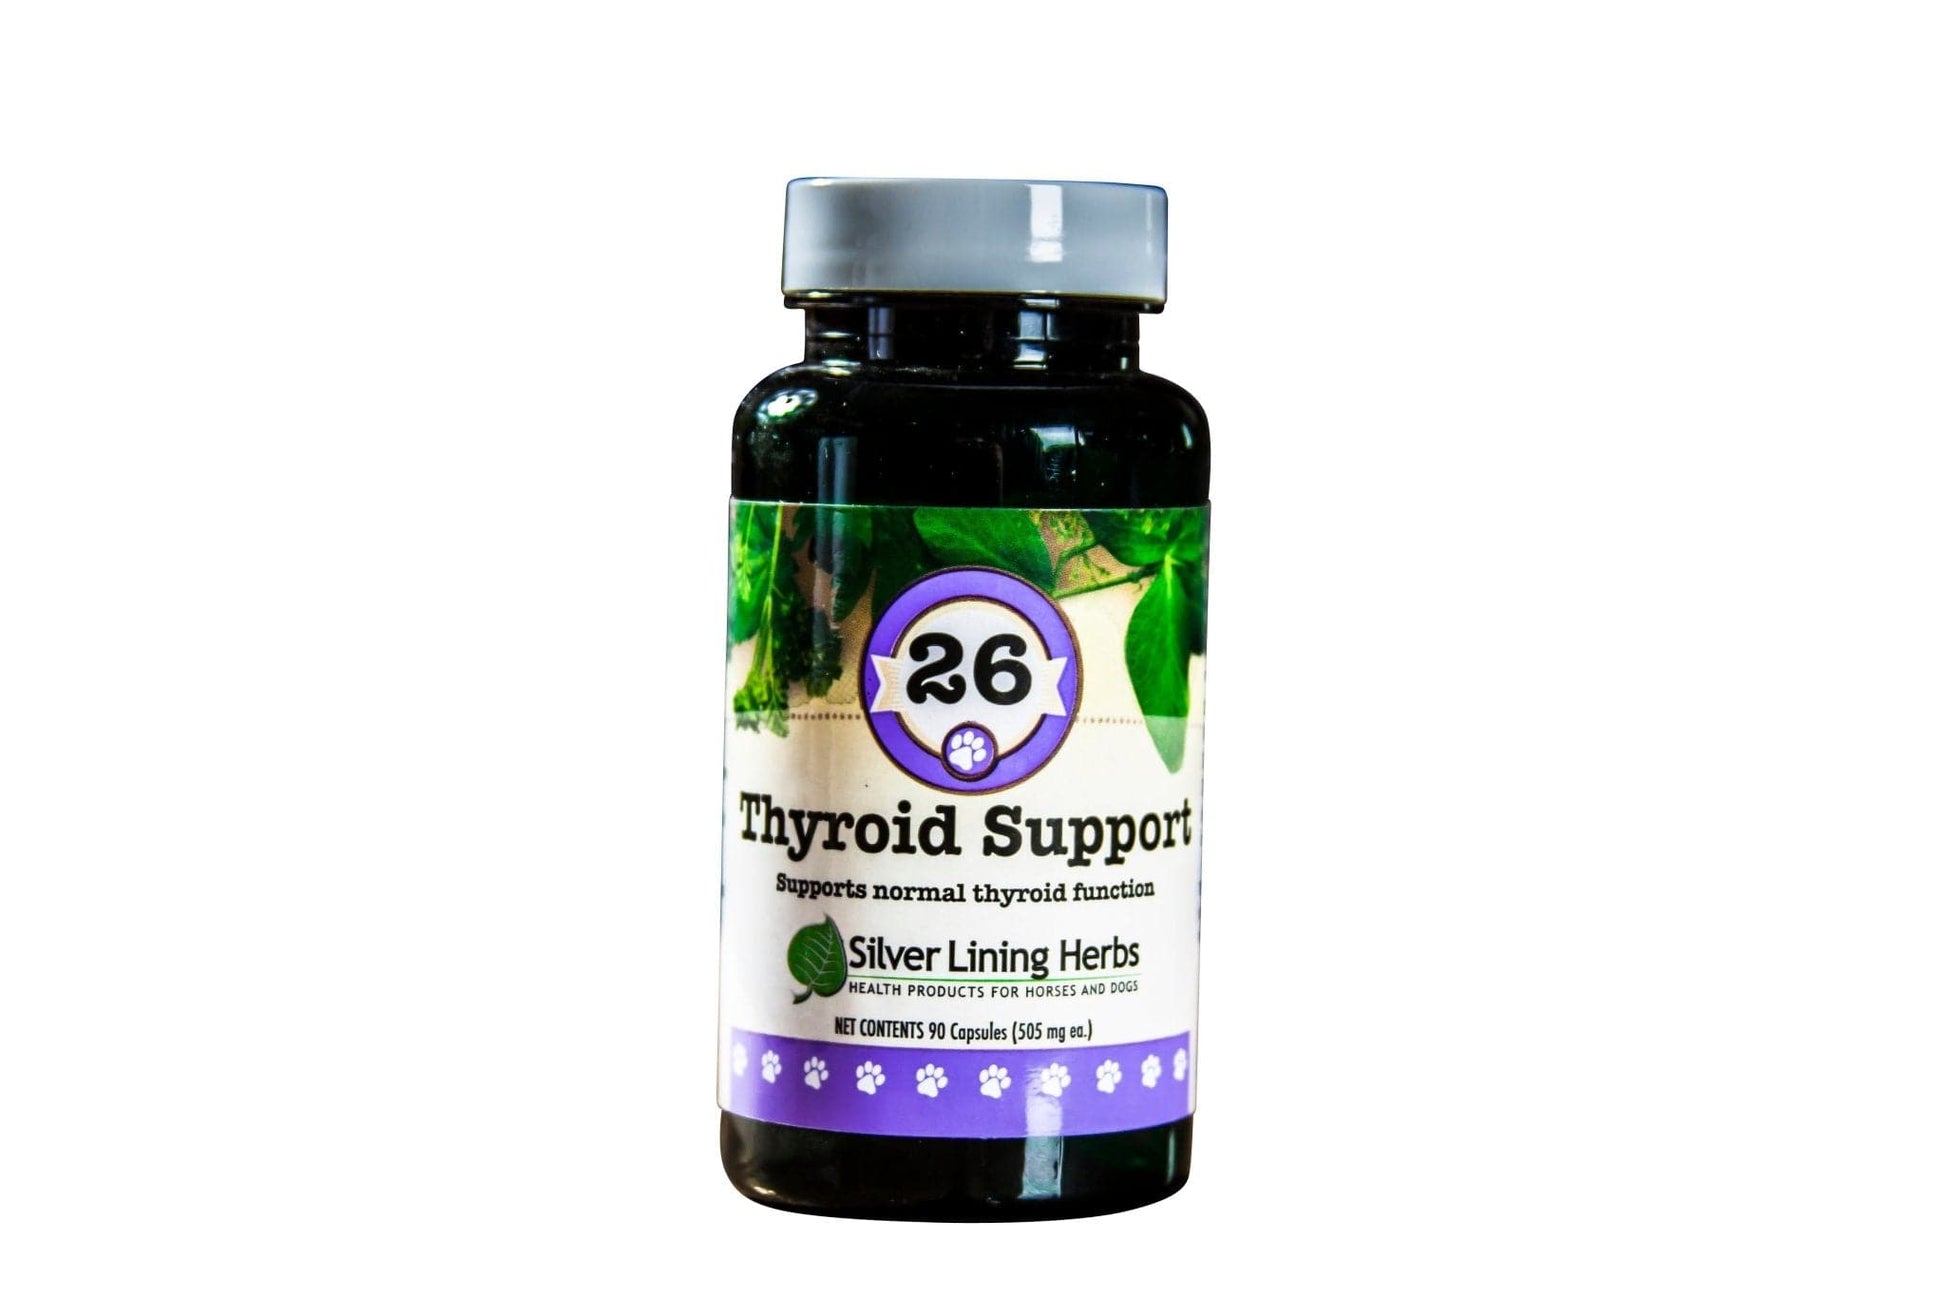 Thyroid Support for Dogs - Silver Lining Herbs